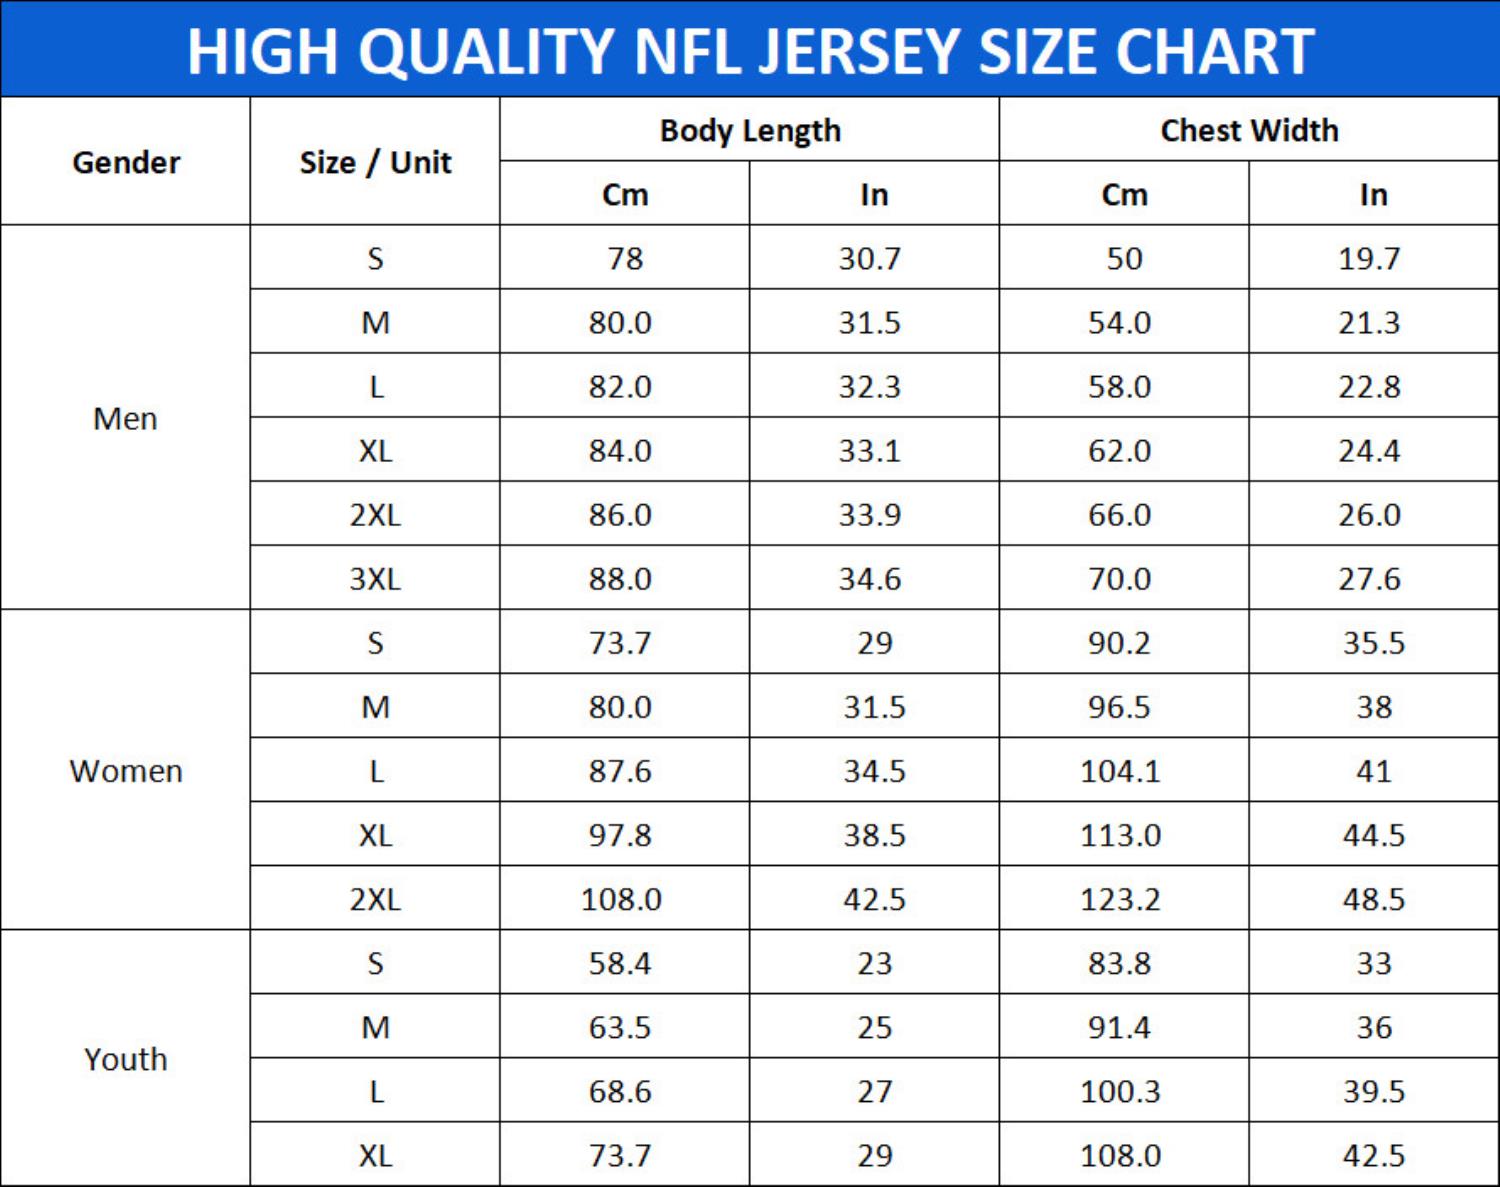 High Quality NFL Jersey